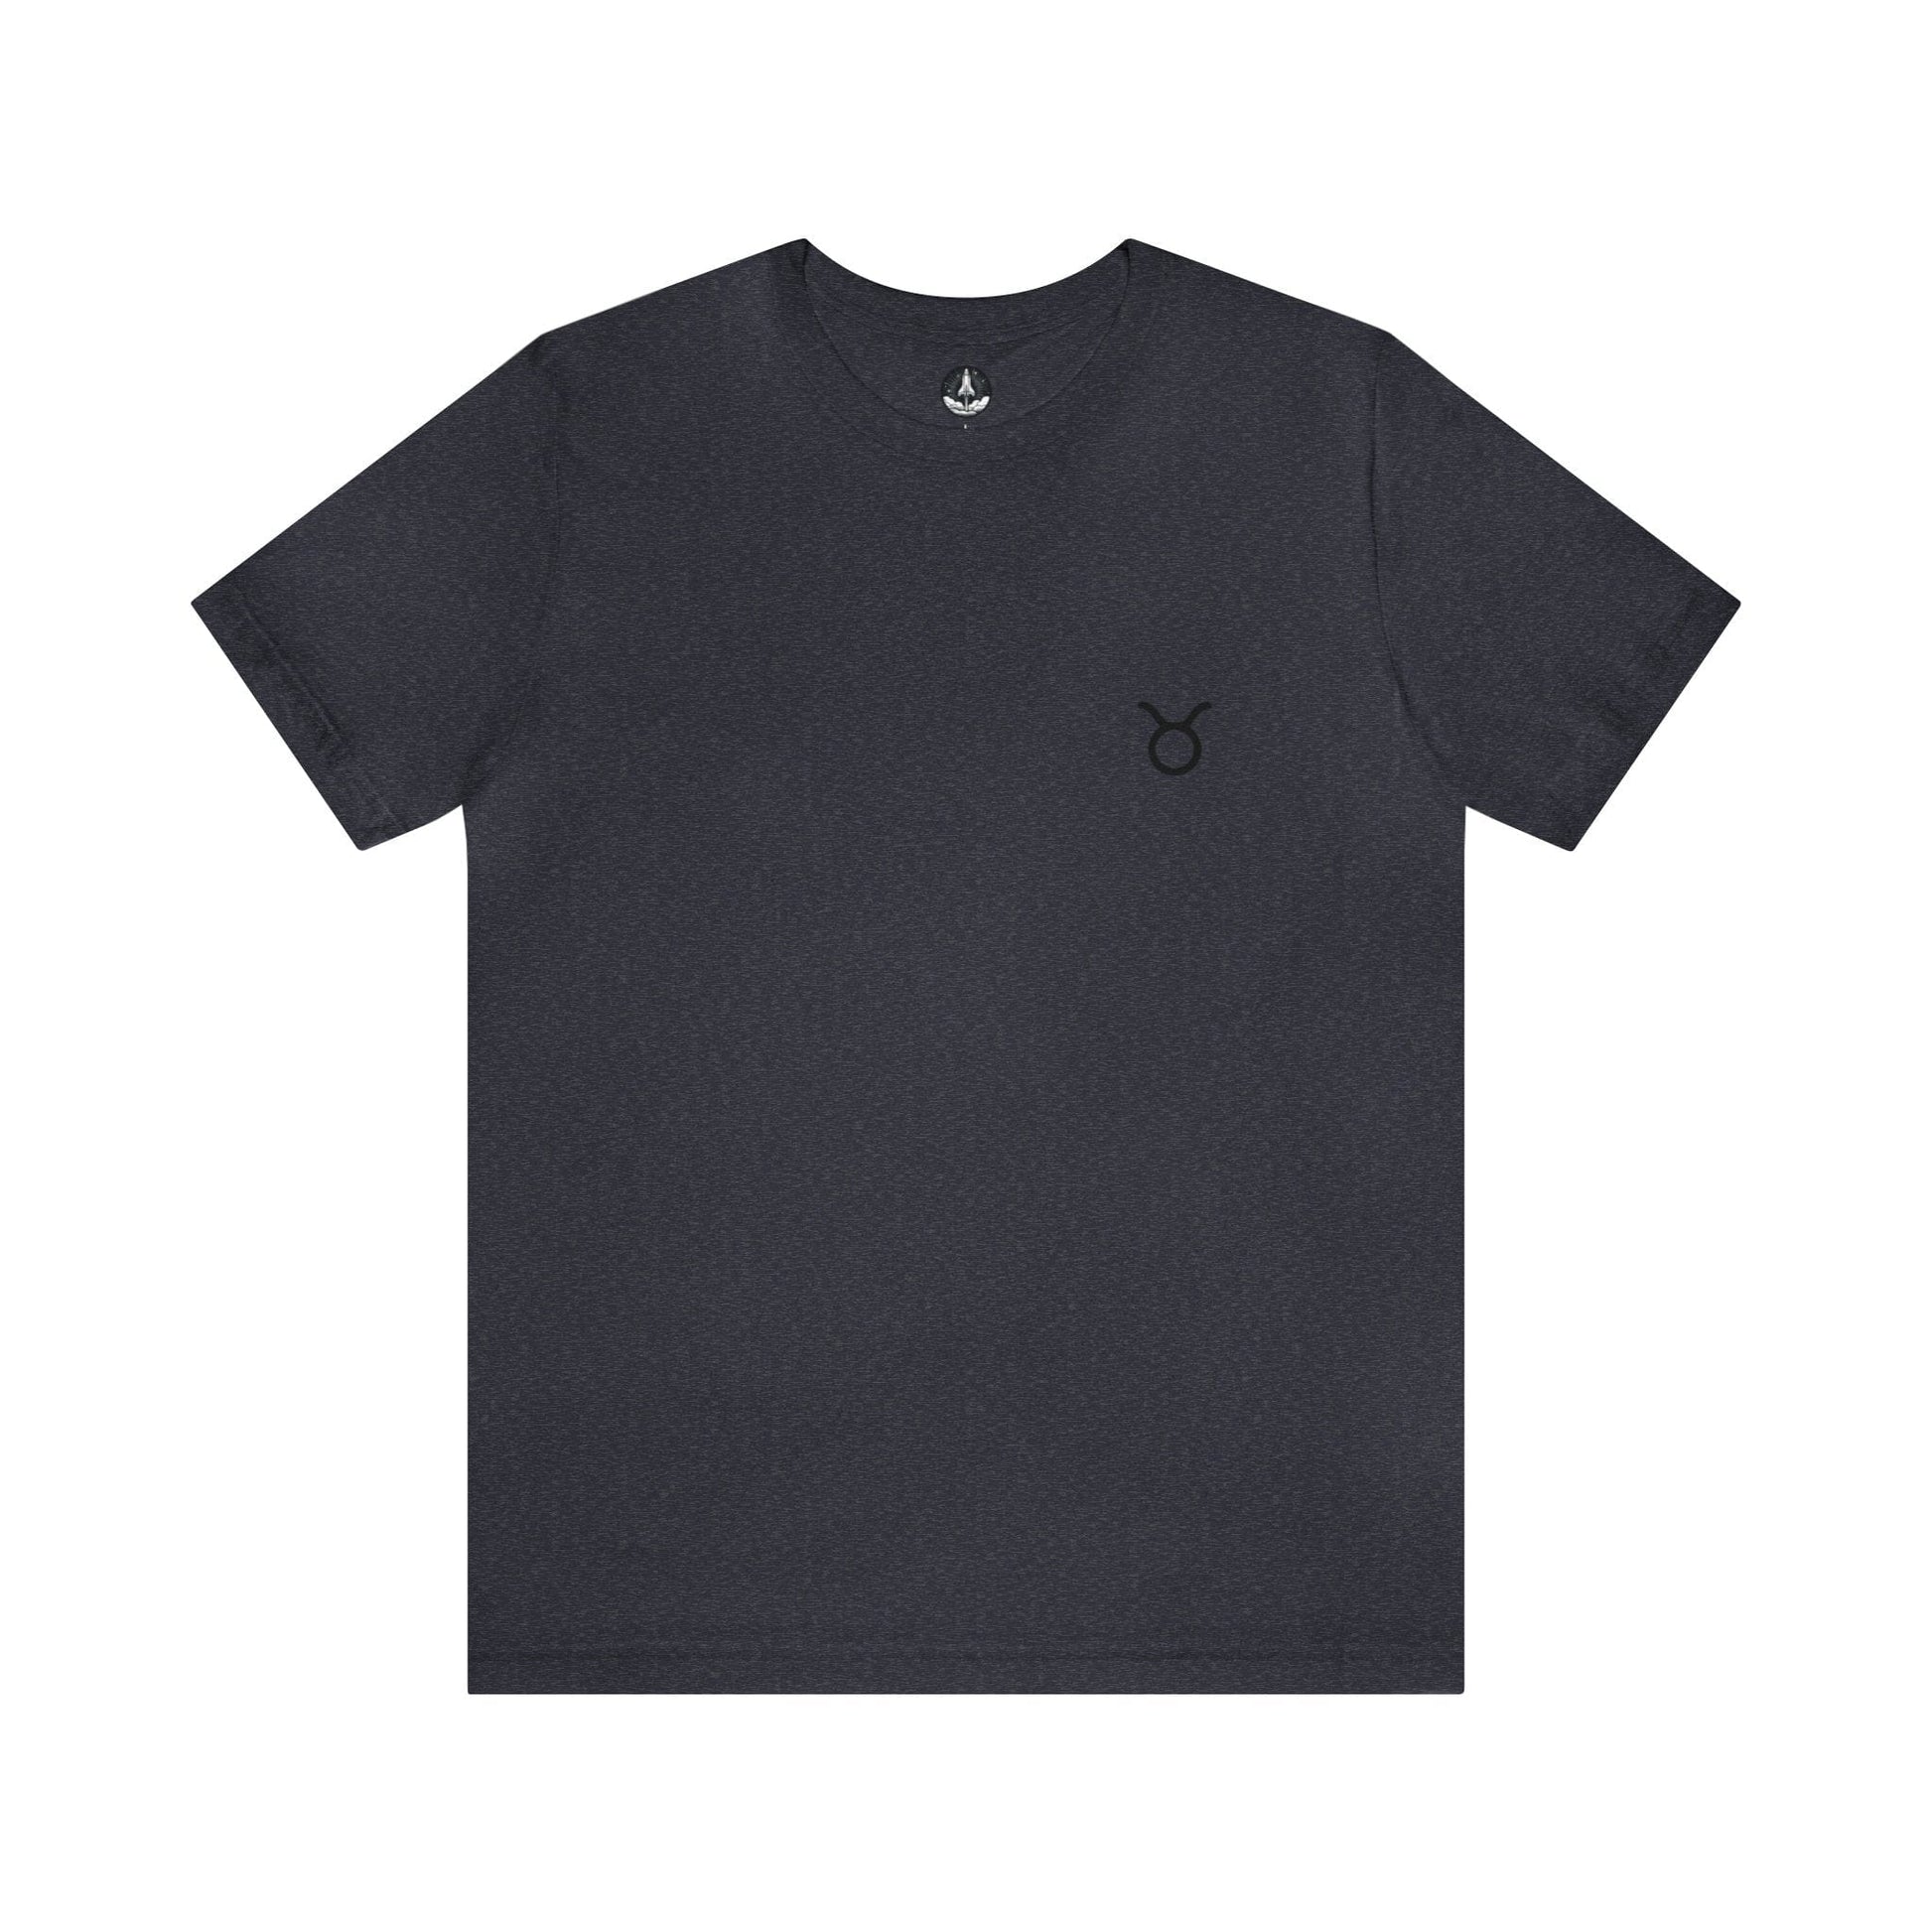 T-Shirt Heather Navy / S Taurus Zodiac Essence T-Shirt: Sophistication Meets Comfort for the Grounded Soul